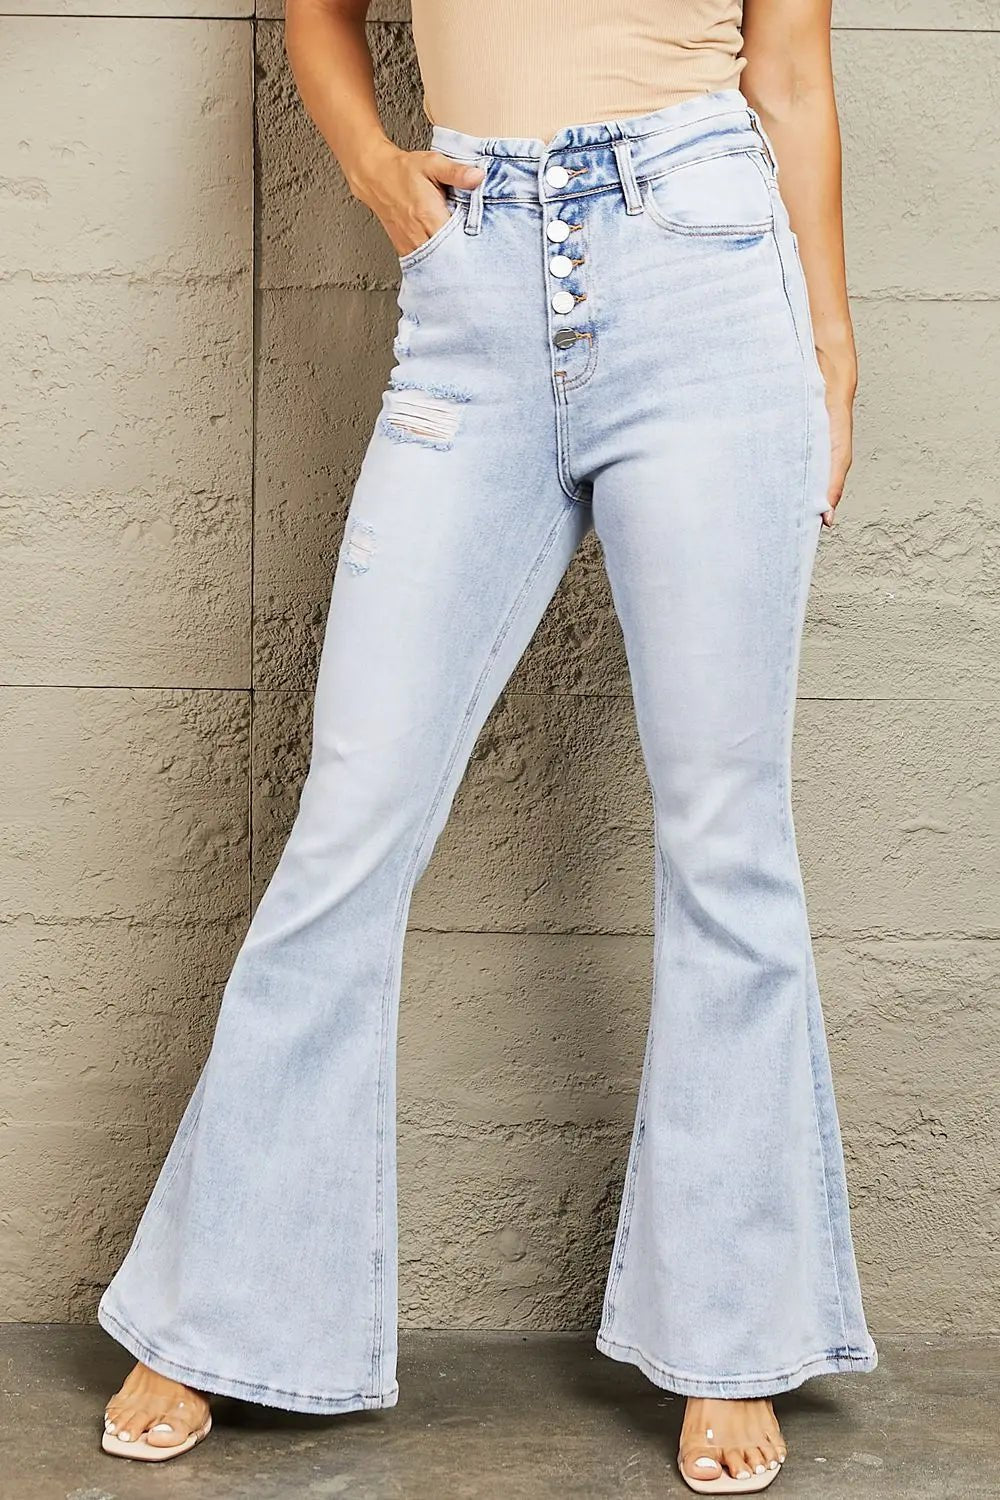 WOMEN'S HIGH WAISTED RETRO FLARE JEANS - MeadeuxWOMEN'S HIGH WAISTED RETRO FLARE JEANSJeansMeadeux